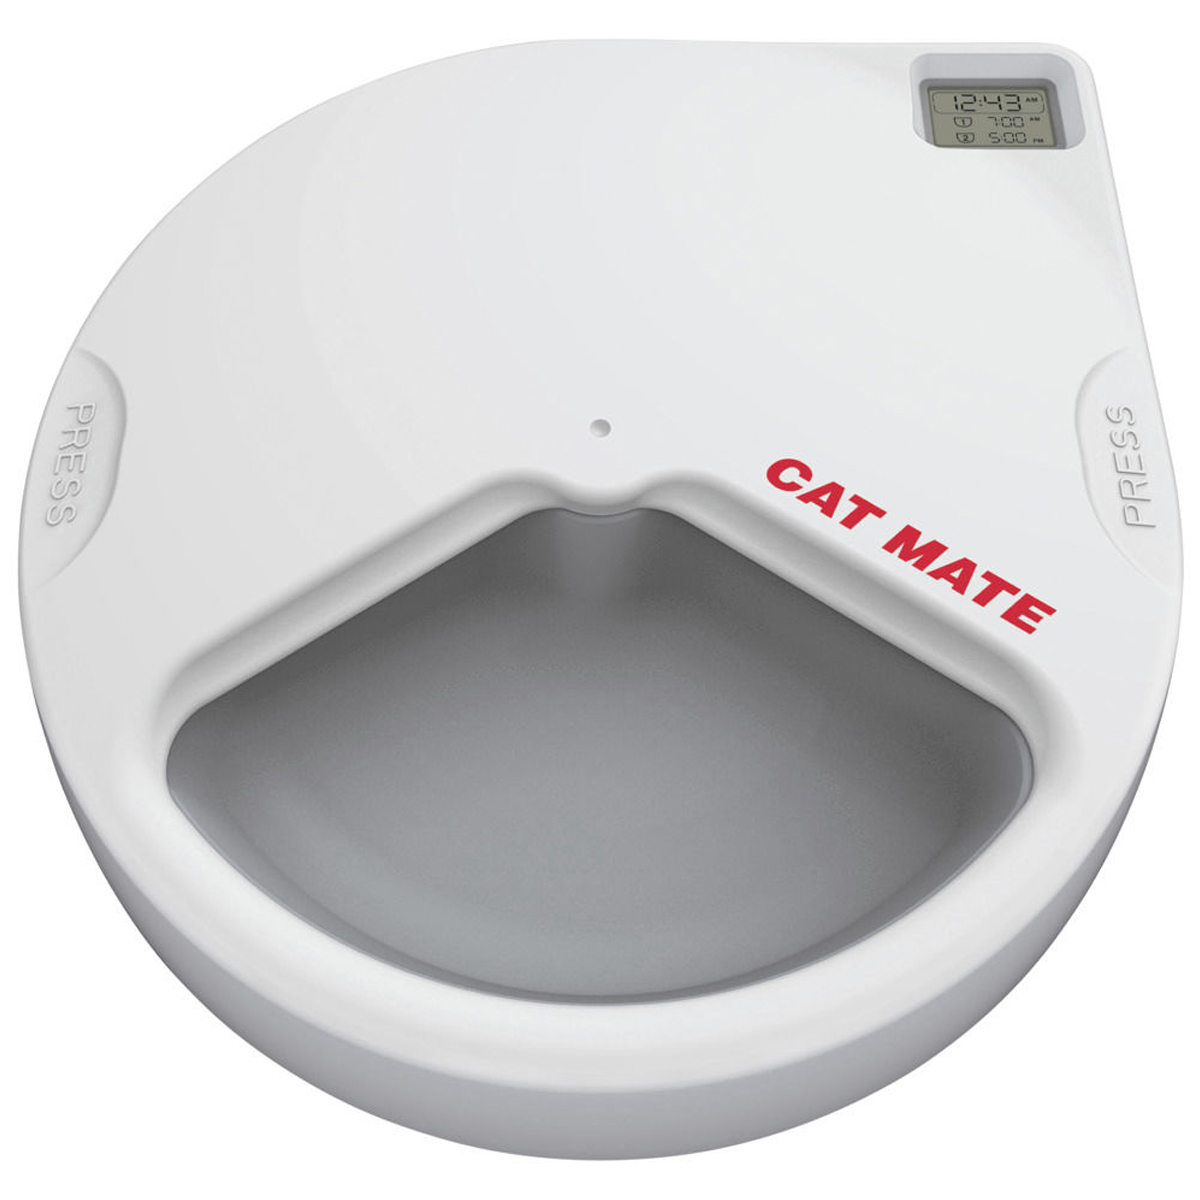 Cat Mate C300 feeder for 3 meals